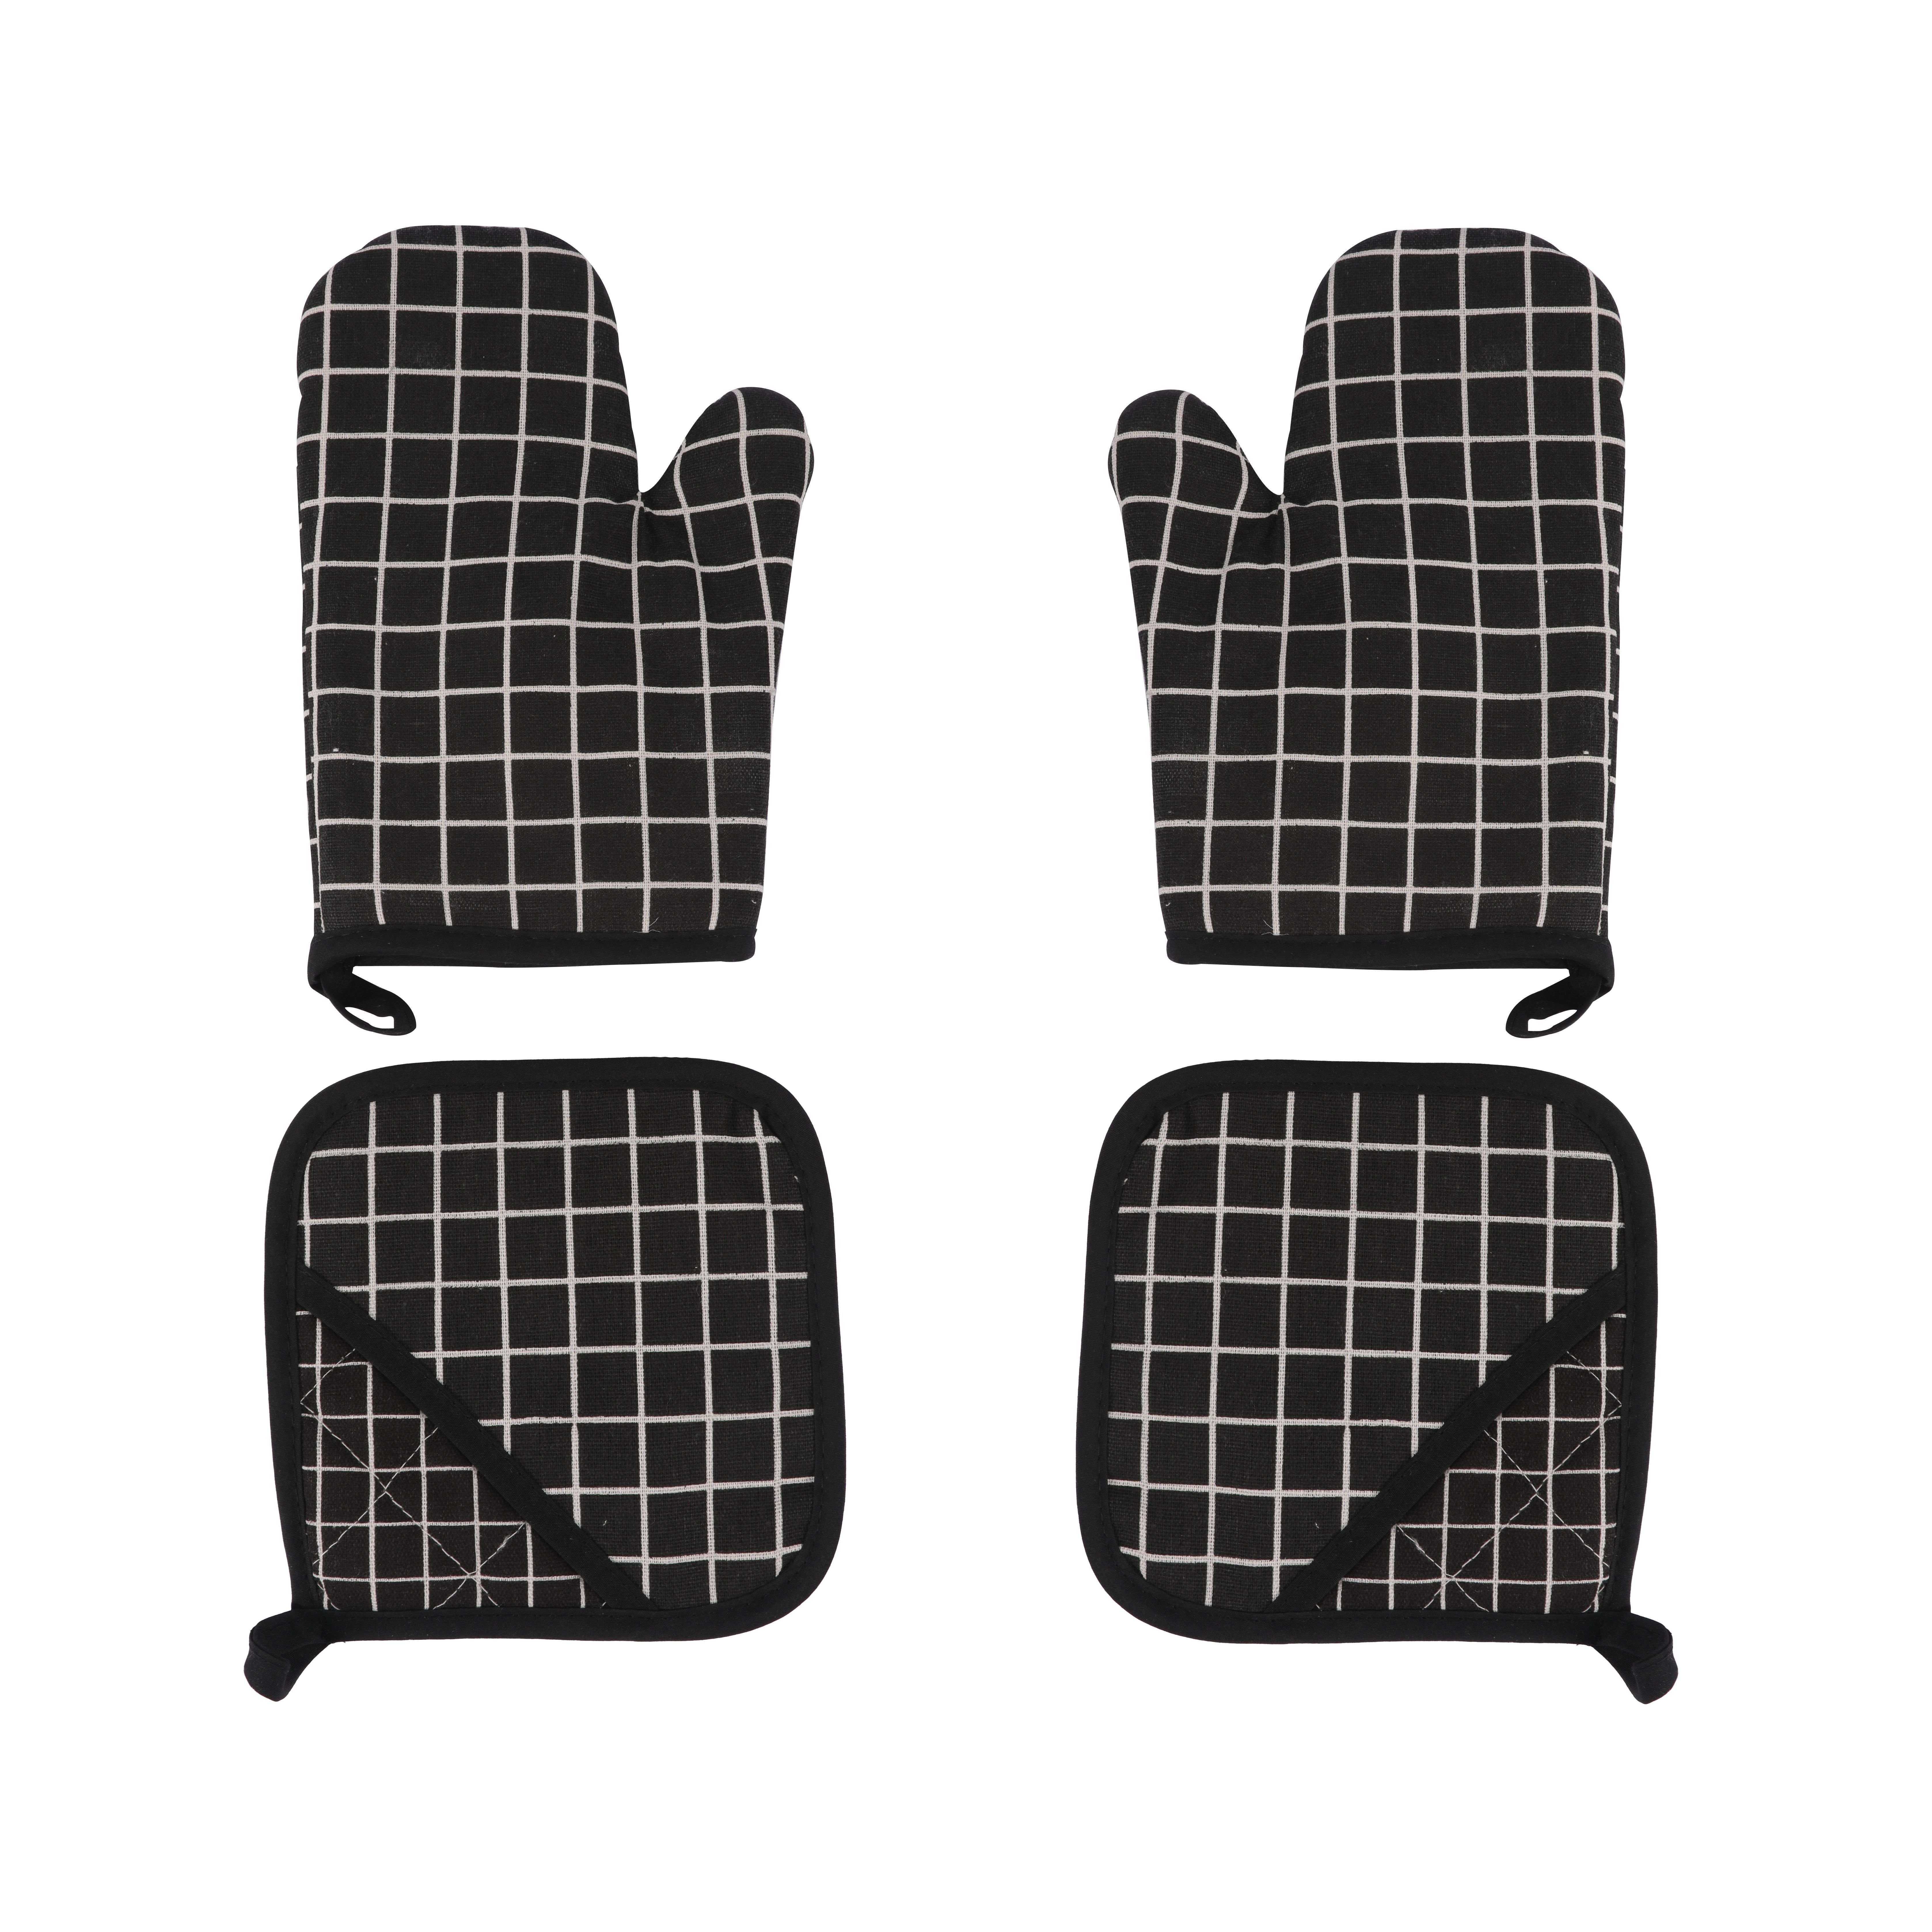 Oven Mitts And Pot Holders Set, Black Grid High Heat Resistant 500